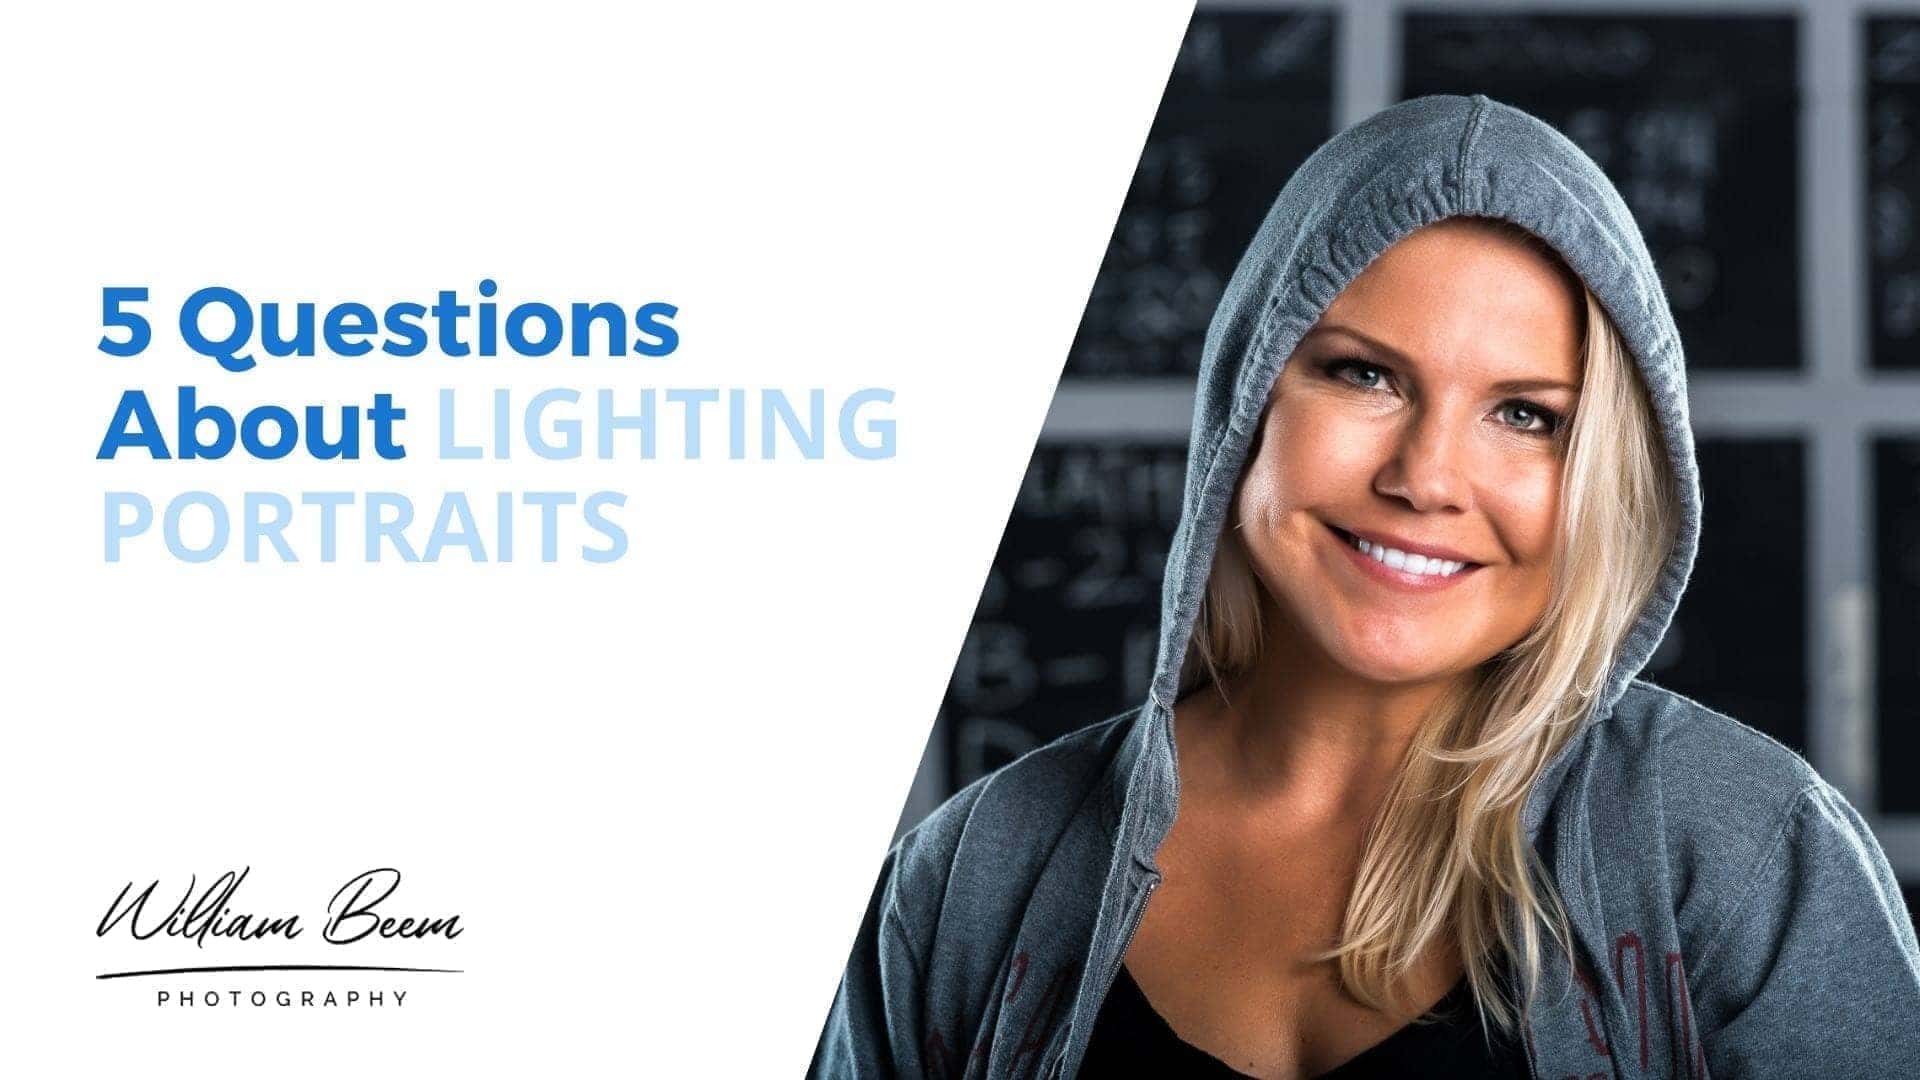 5 QUESTIONS ABOUT LIGHTING PORTRAITS